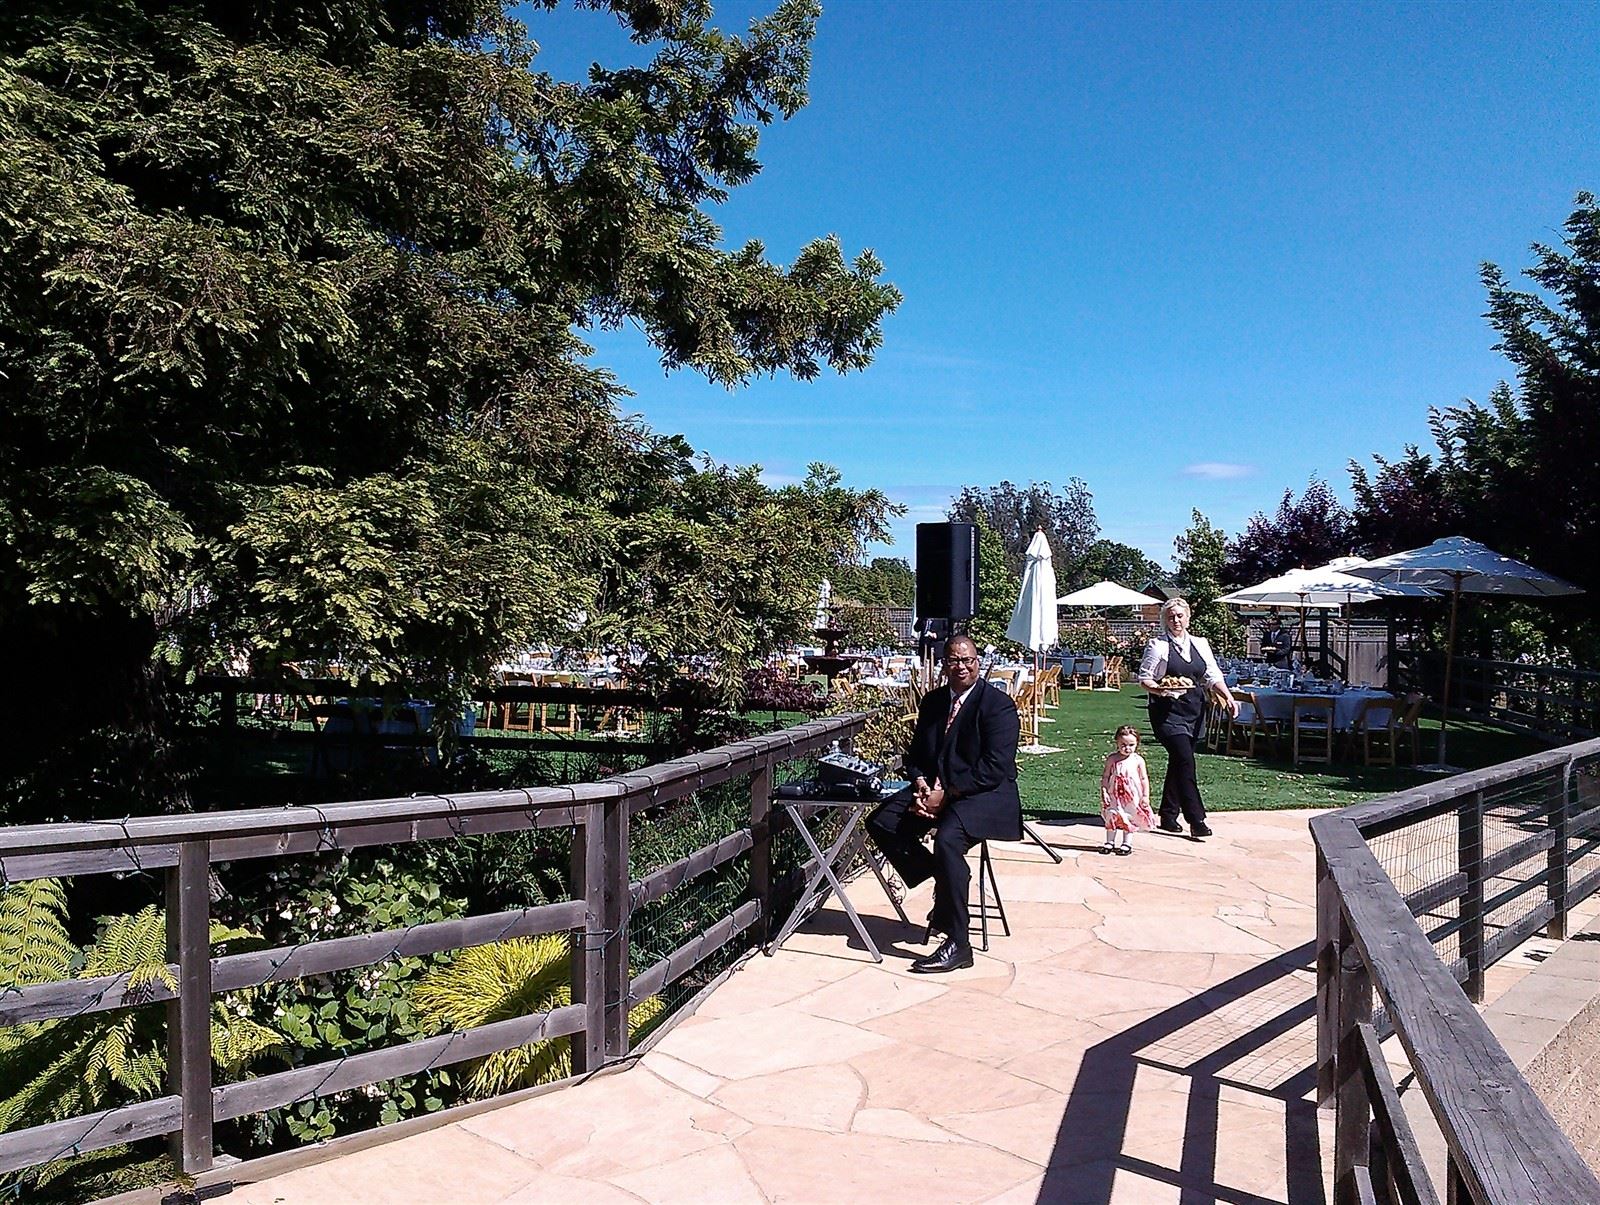 Sova Gardens Wedding - Runaway DJ and Events : Michael Buble for the dinner set!